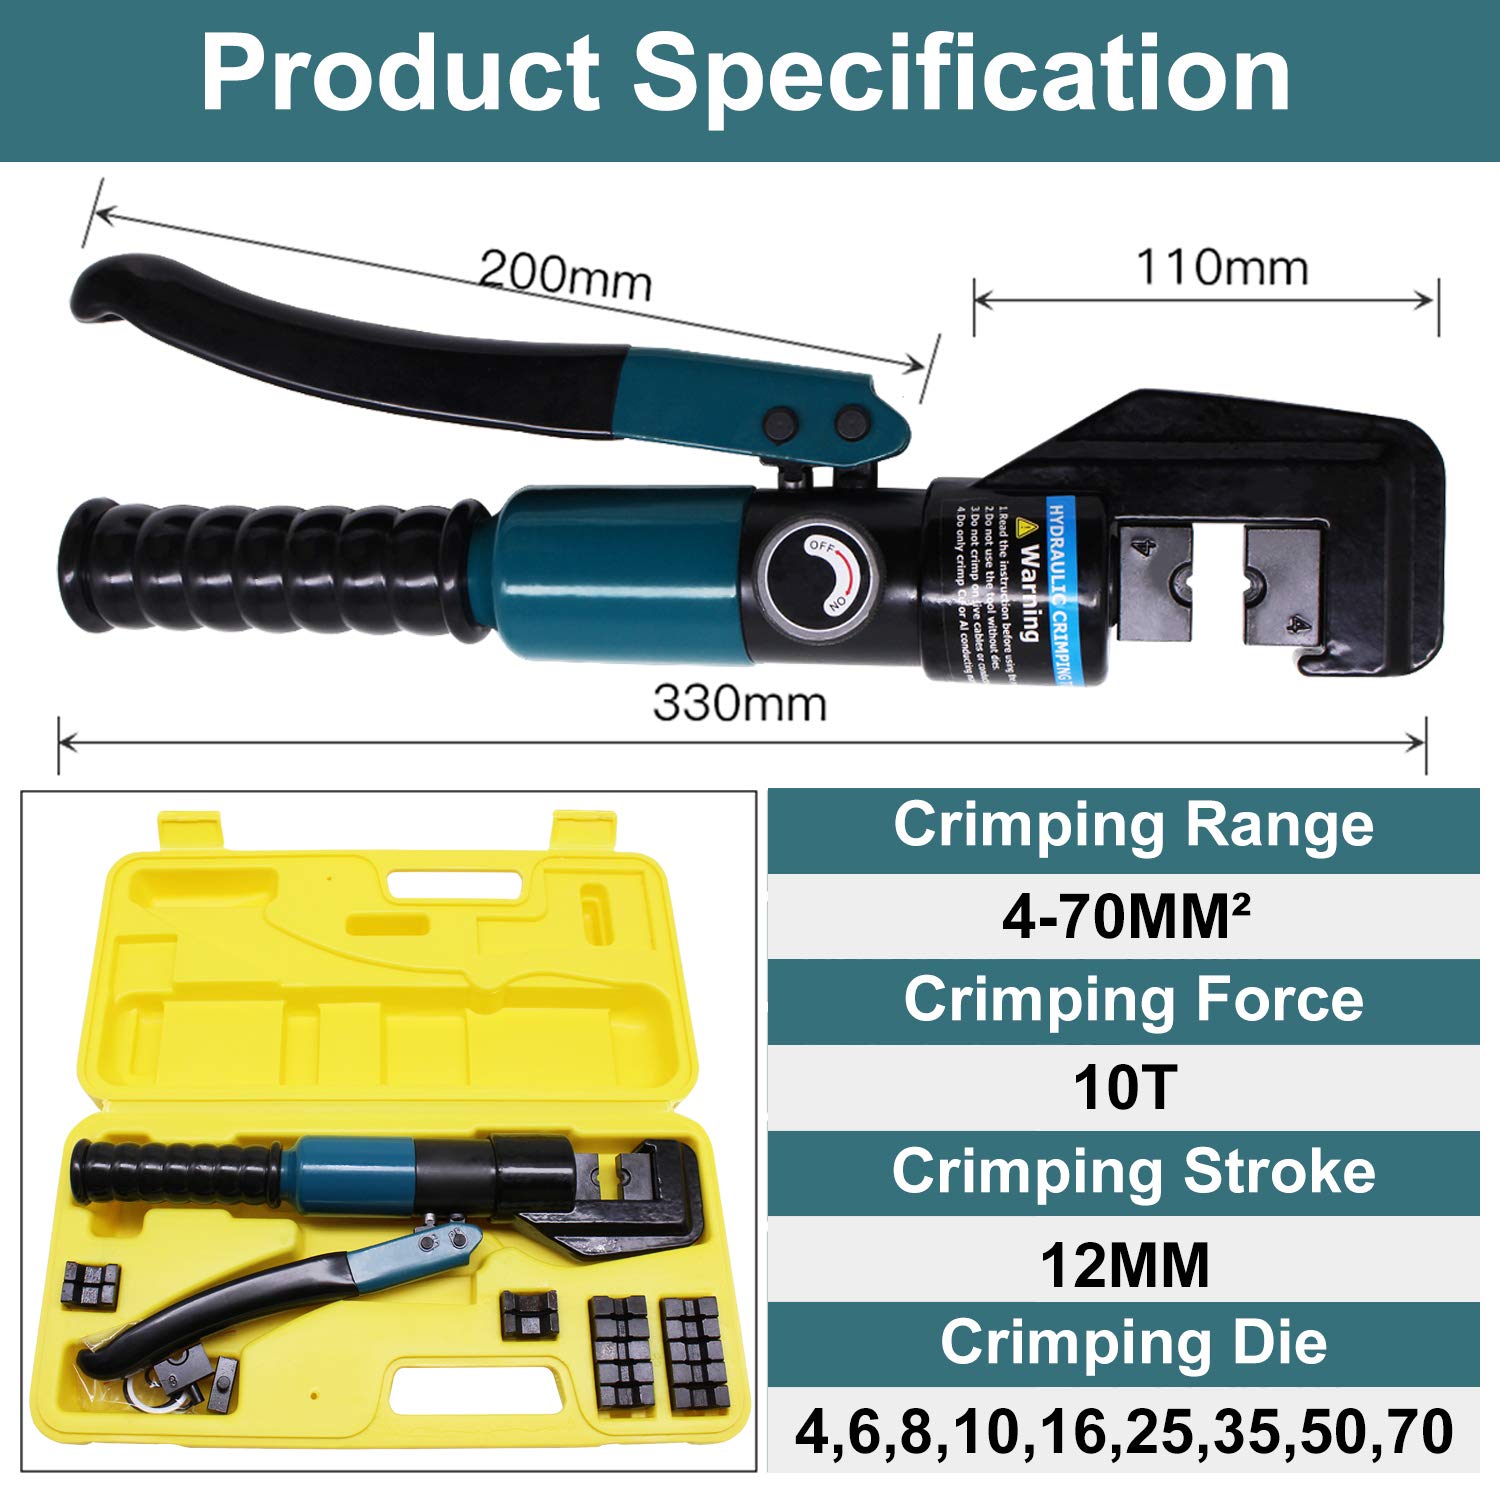 BLIKA 10 Ton Hydraulic Crimping Tool and Cable Cutter, Hydraulic Wire Battery Cable Lug Terminal Crimper Crimping Tool with 11 Dies, Wire Swaging Tool for 1/8" to 3/16" Cable Railing Hardware